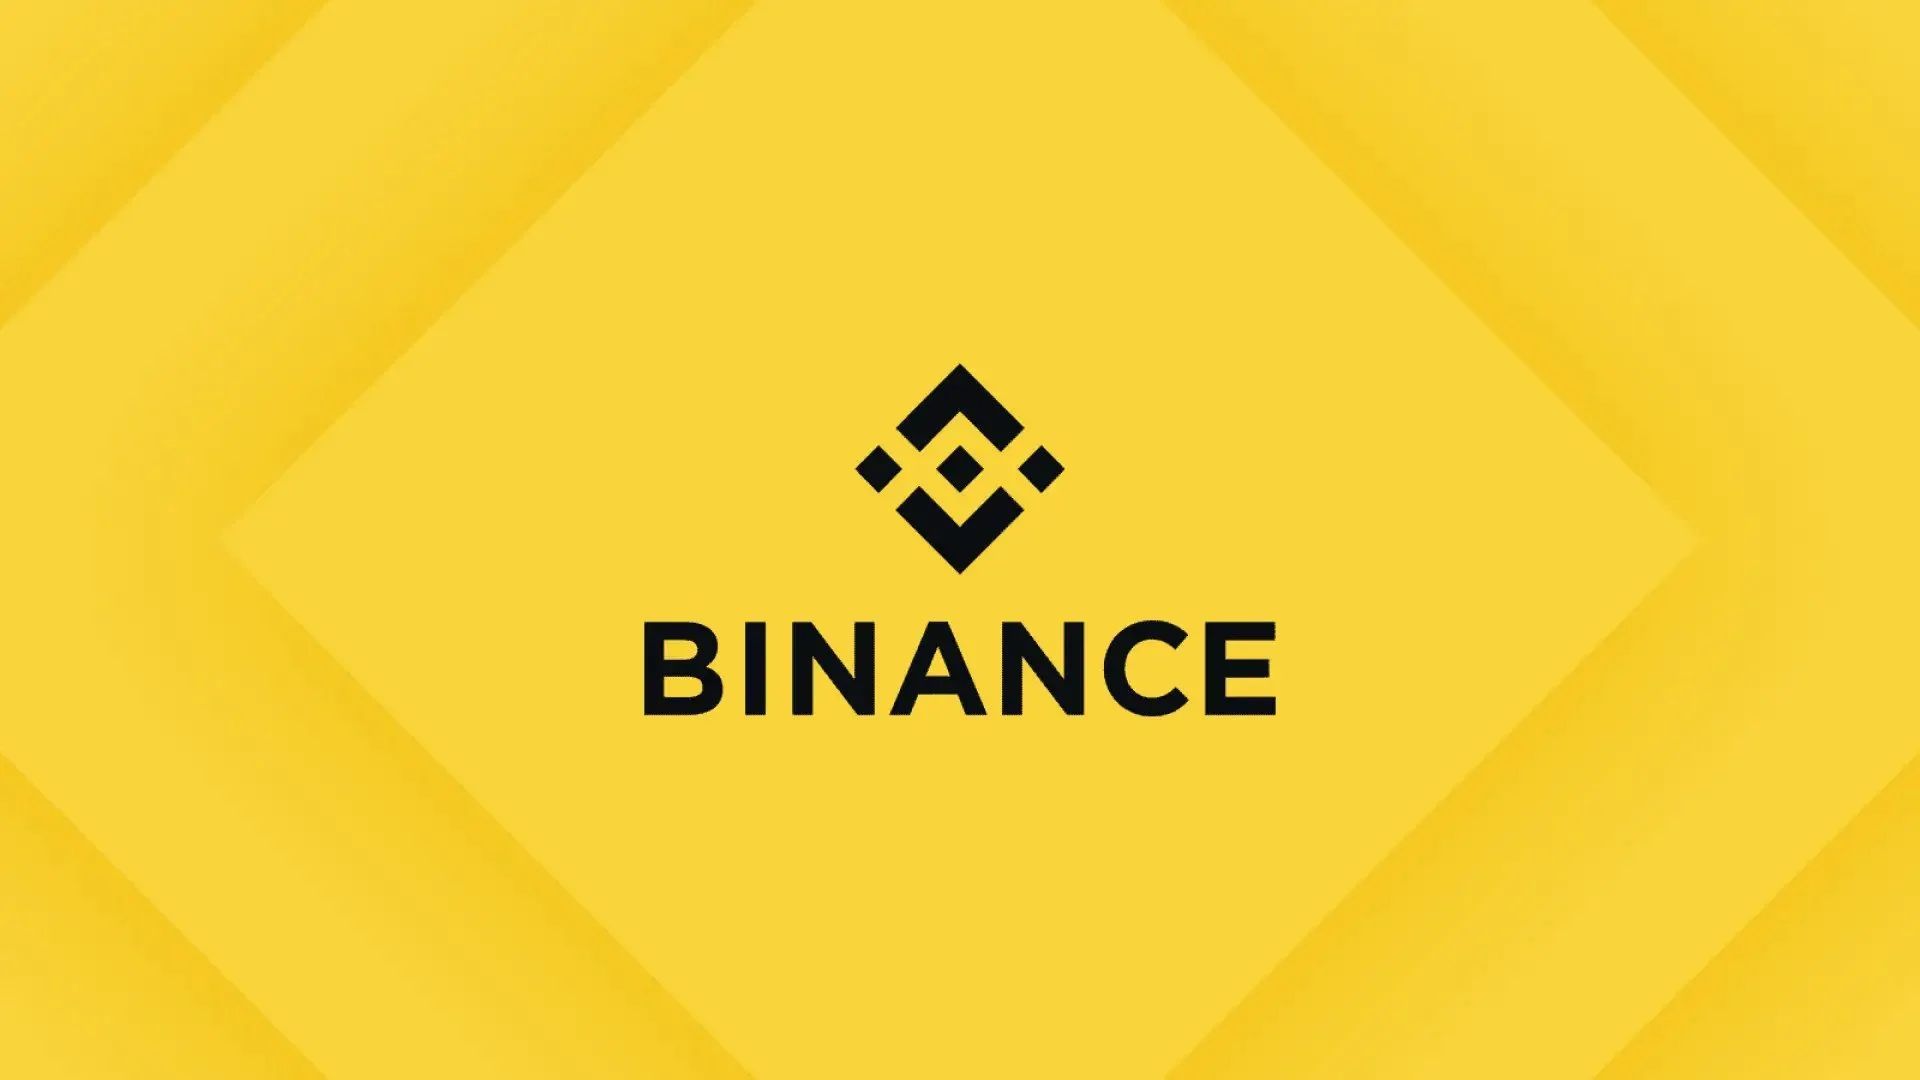 Binance Word of the Day answers: Crypto Gaming theme (Image credit)